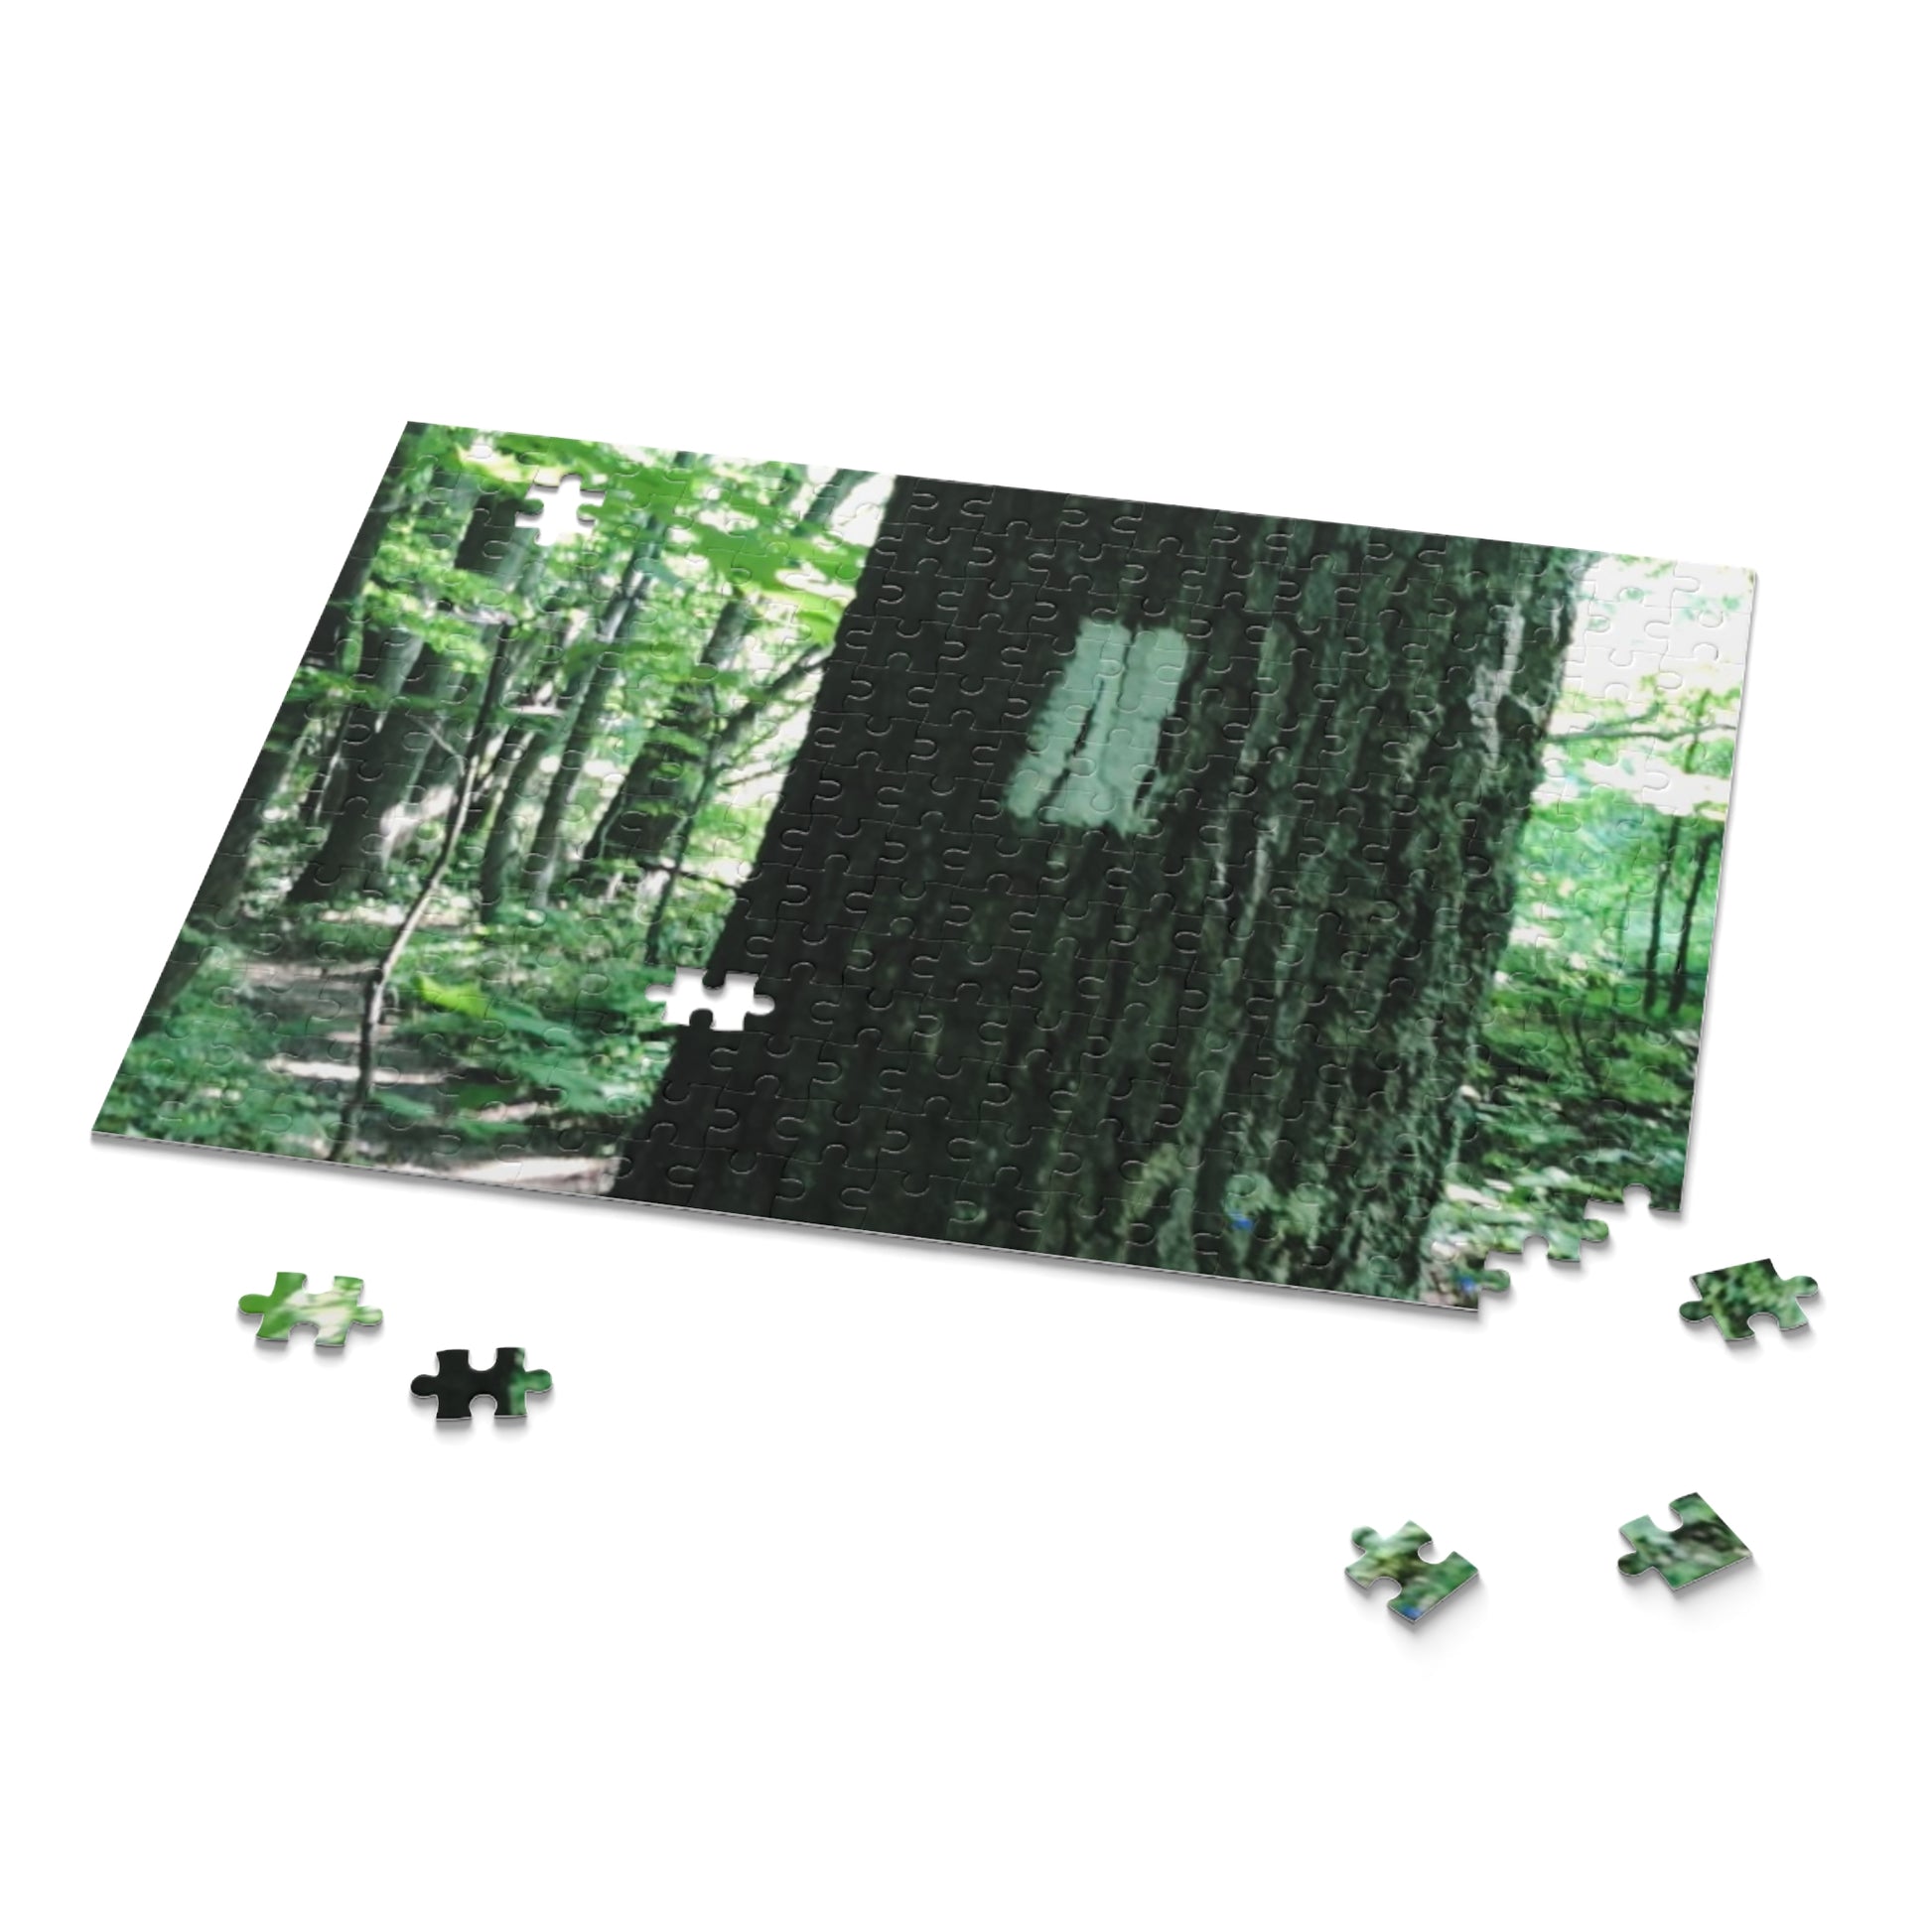 Appalachian Trail Puzzle, Gift for hikers, gift for Appalachian hikers, Appalachian Trail Puzzle